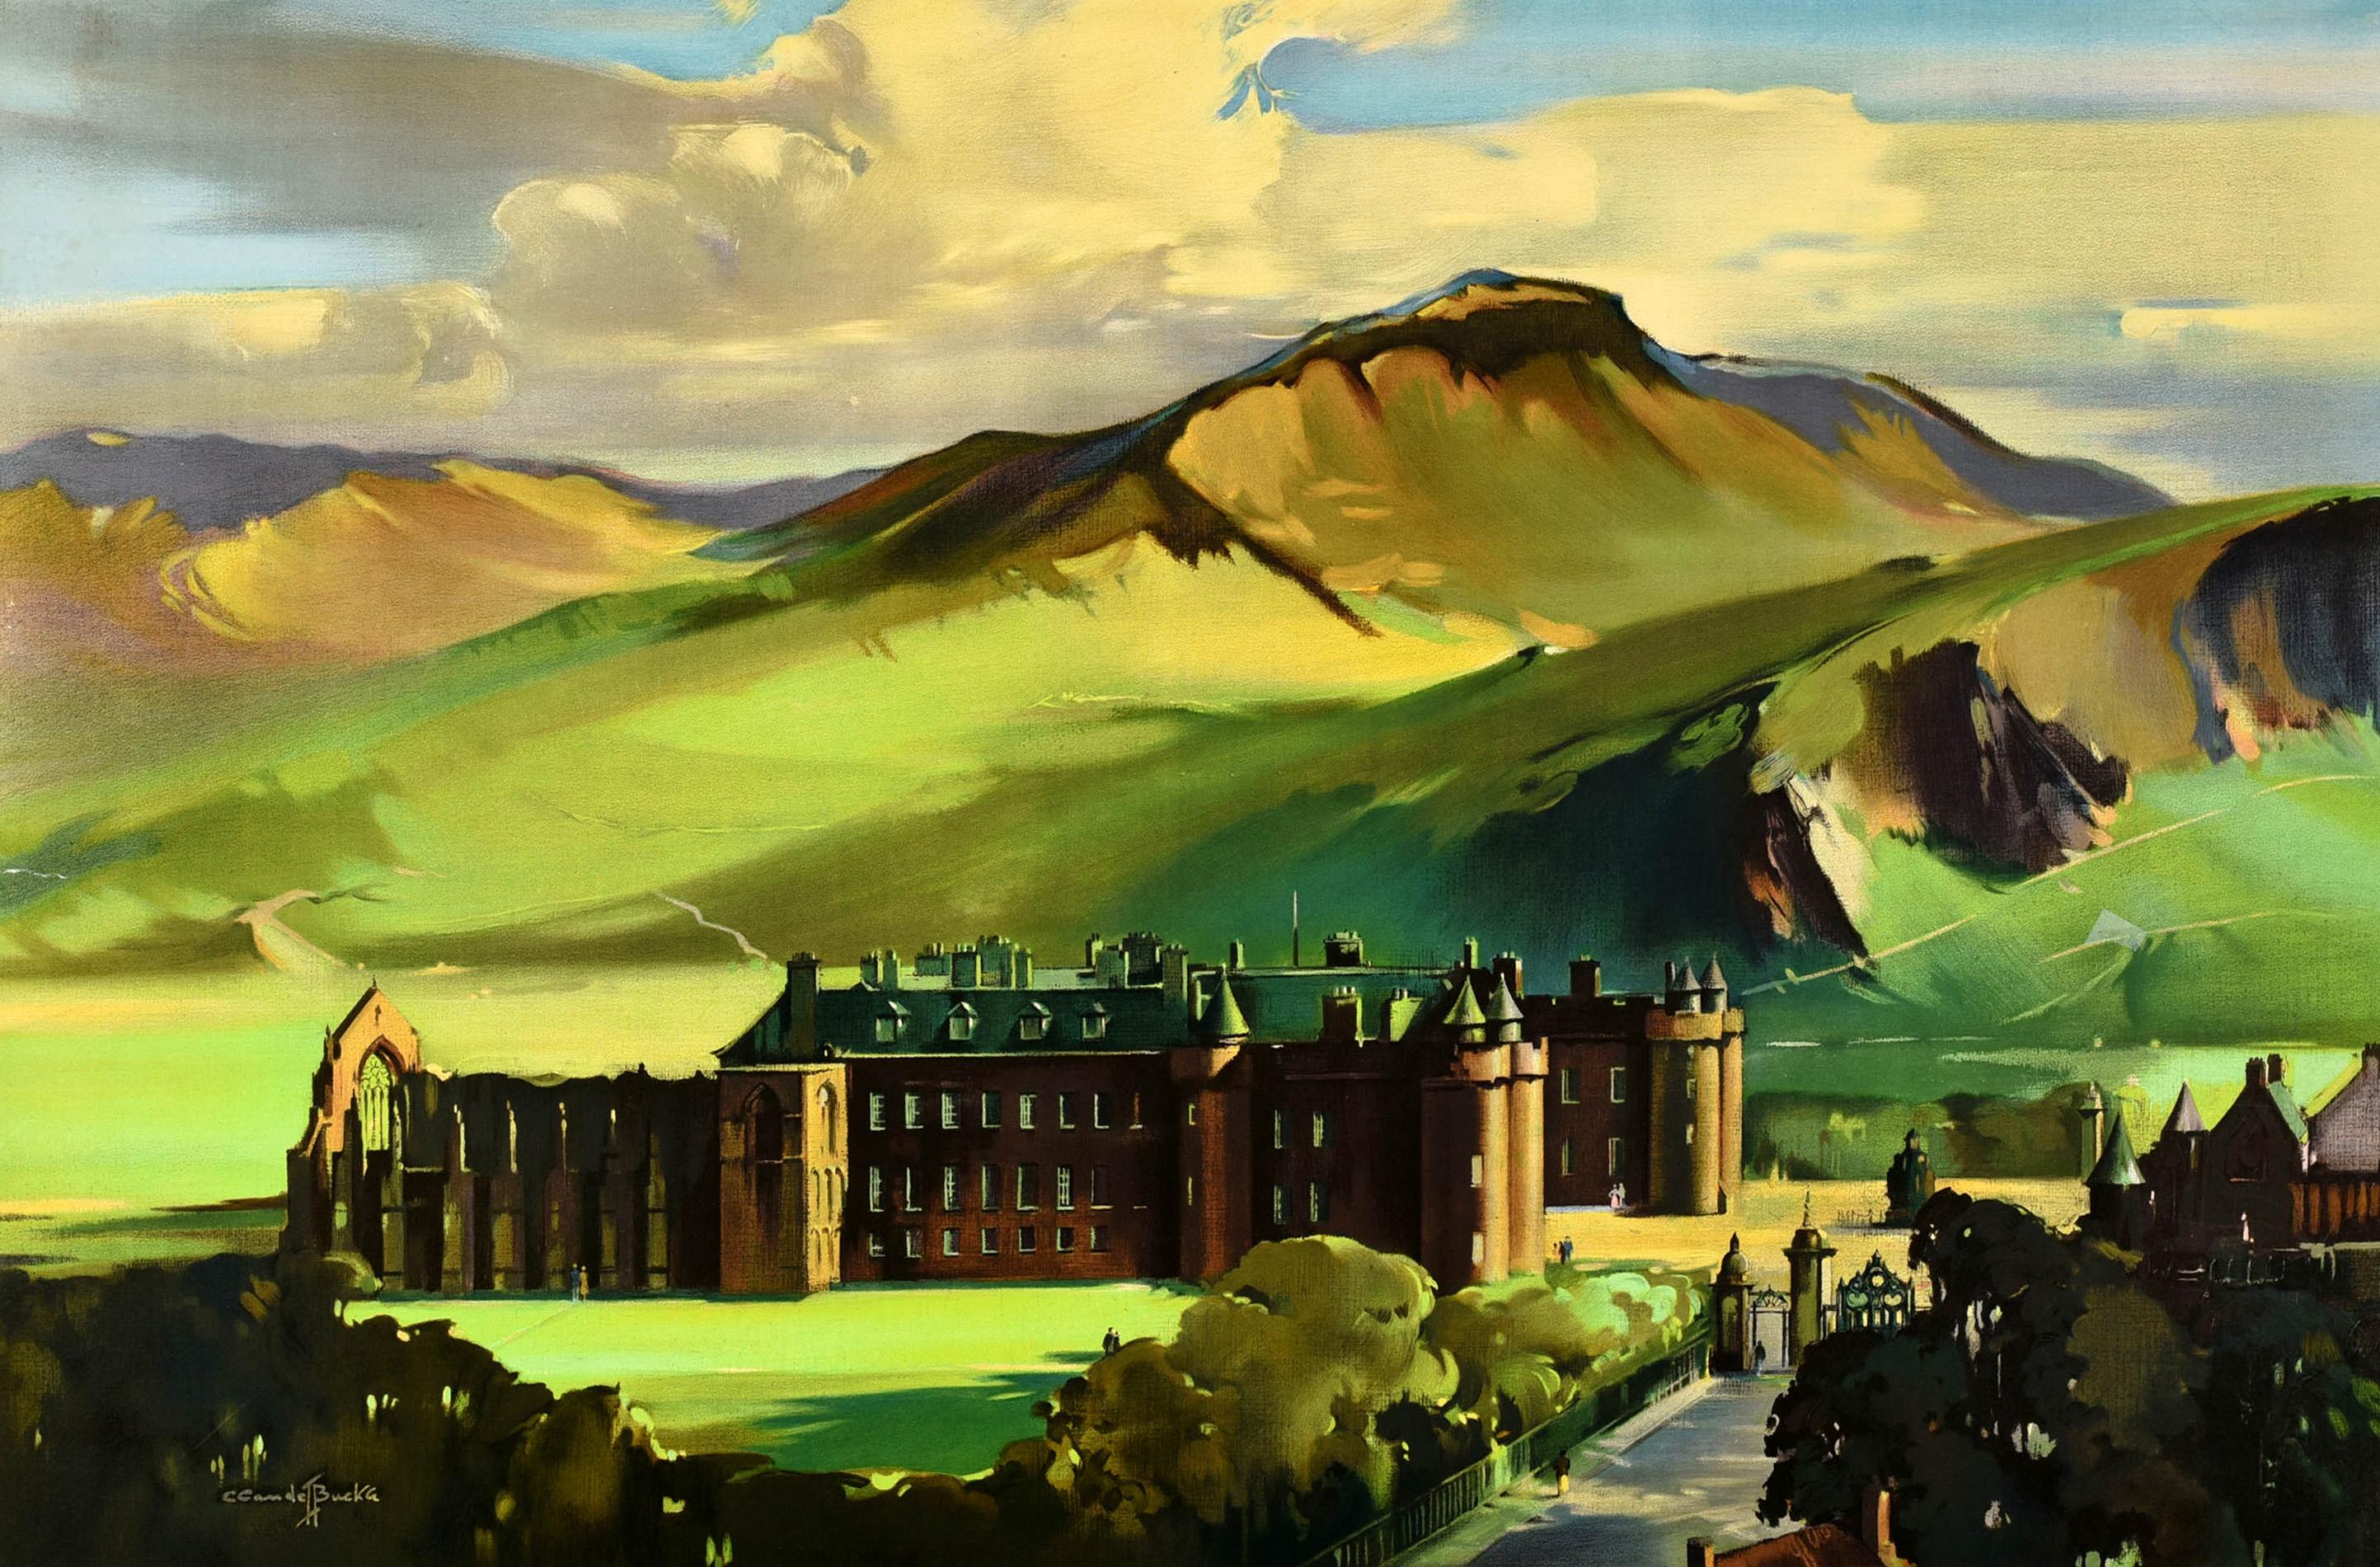 Original vintage British Railways poster - The Palace of Holyroodhouse See Scotland By Train - featuring stunning artwork by the notable painter and poster artist Claude Buckle (1905-1973) of the historic Holyrood Palace and ruins of the Augustinian